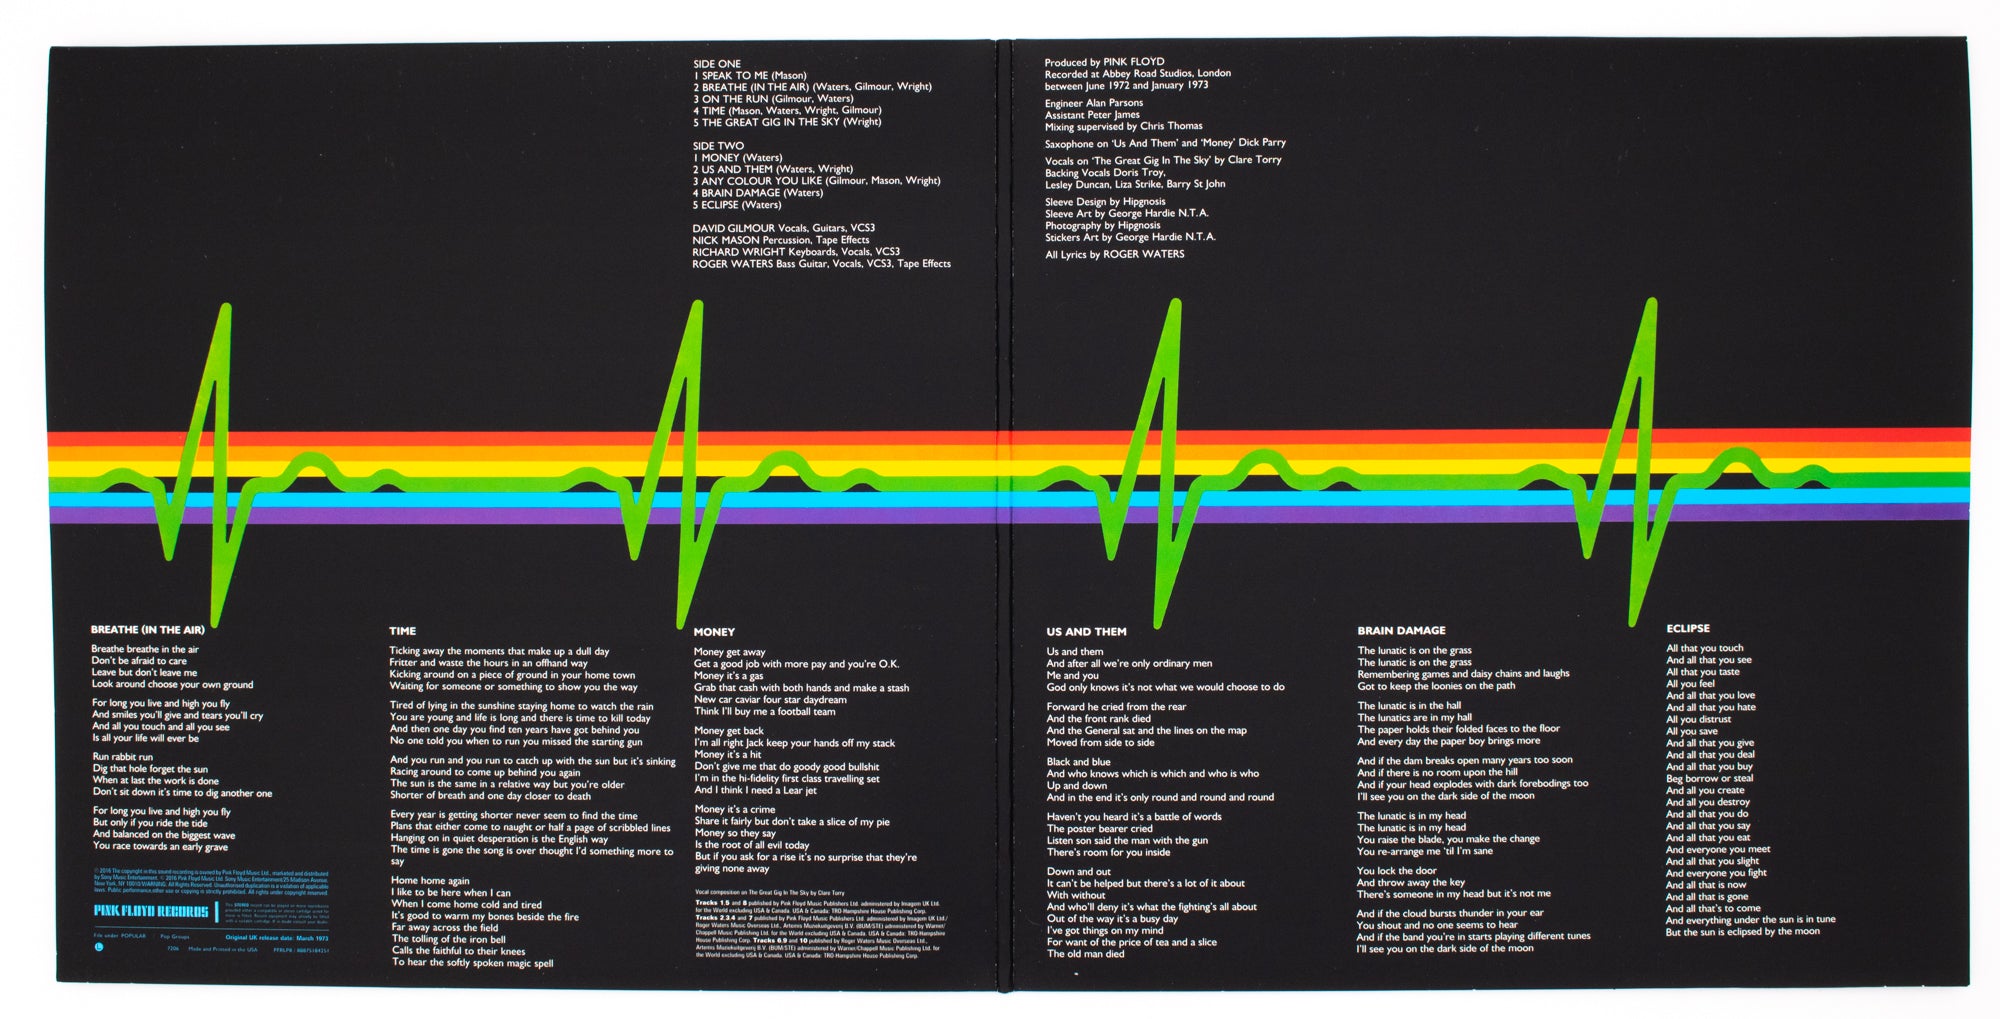 Roger Waters Signed Pink Floyd Dark Side of the Moon Album BAS Beckett Authenticated